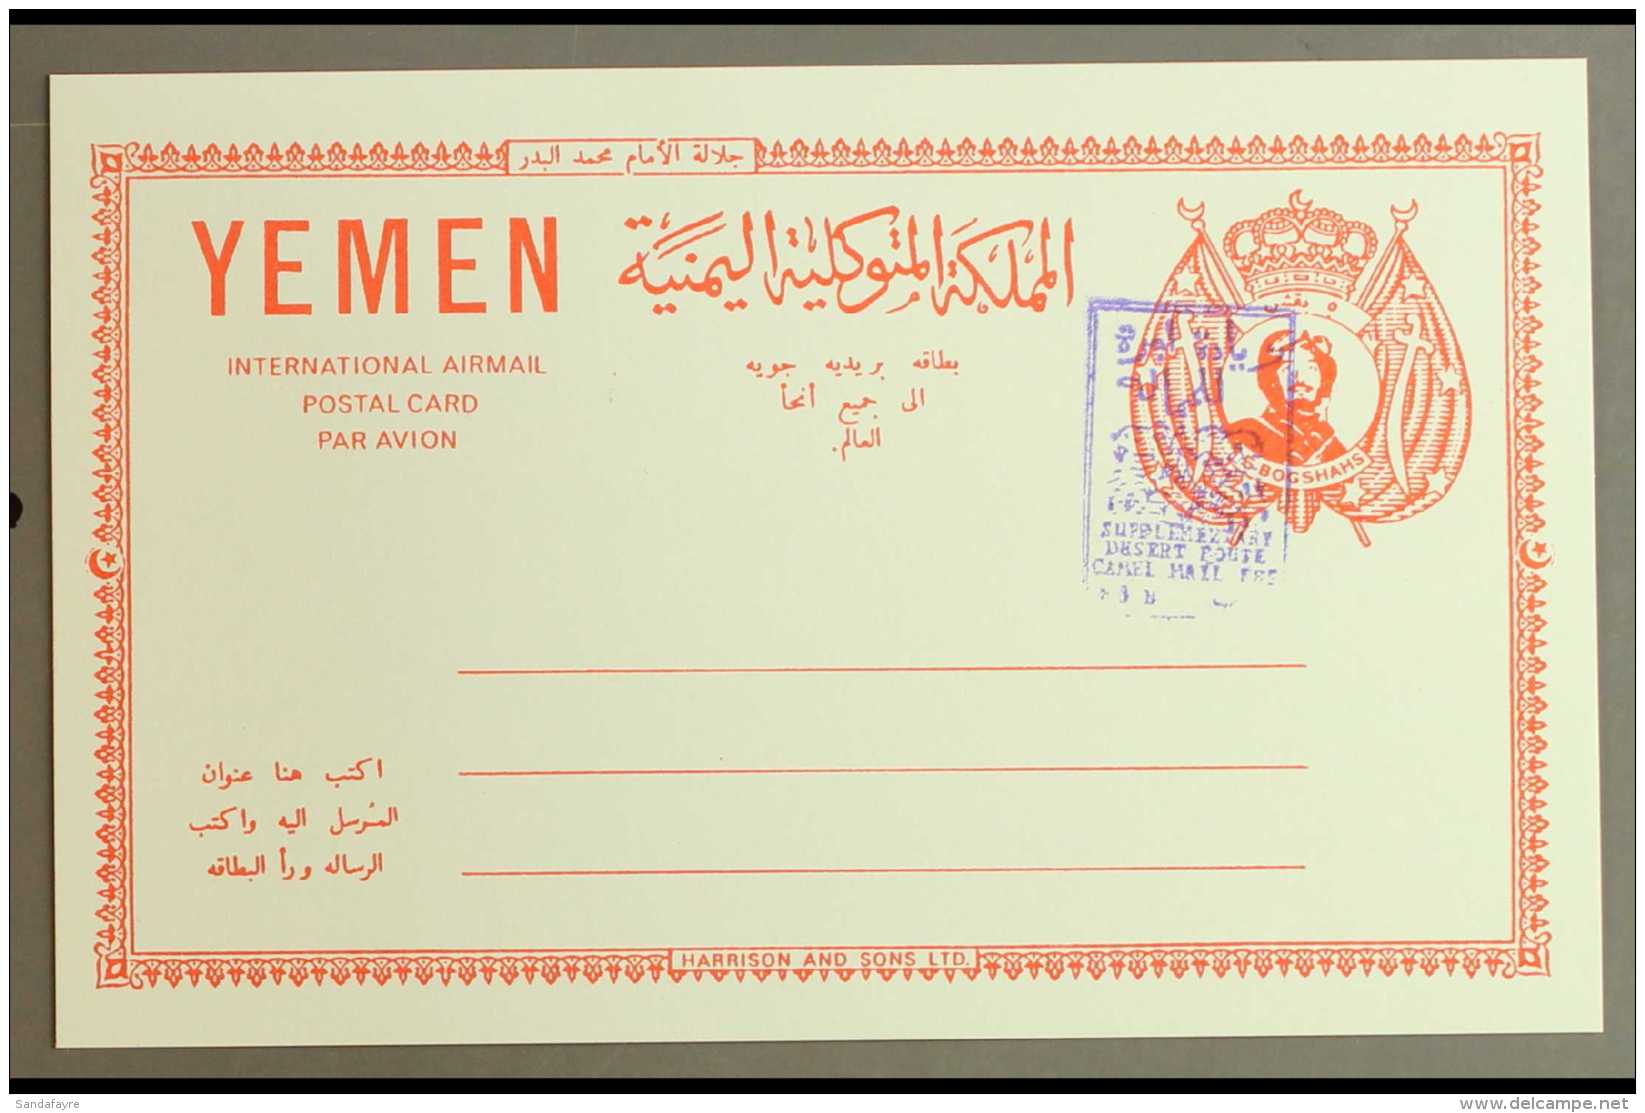 ROYALIST 1964 PROOF On Card (front Only) Of A 5b Red On Pale Blue Imam Al-Badr Airmail Postal Card, With An... - Yémen